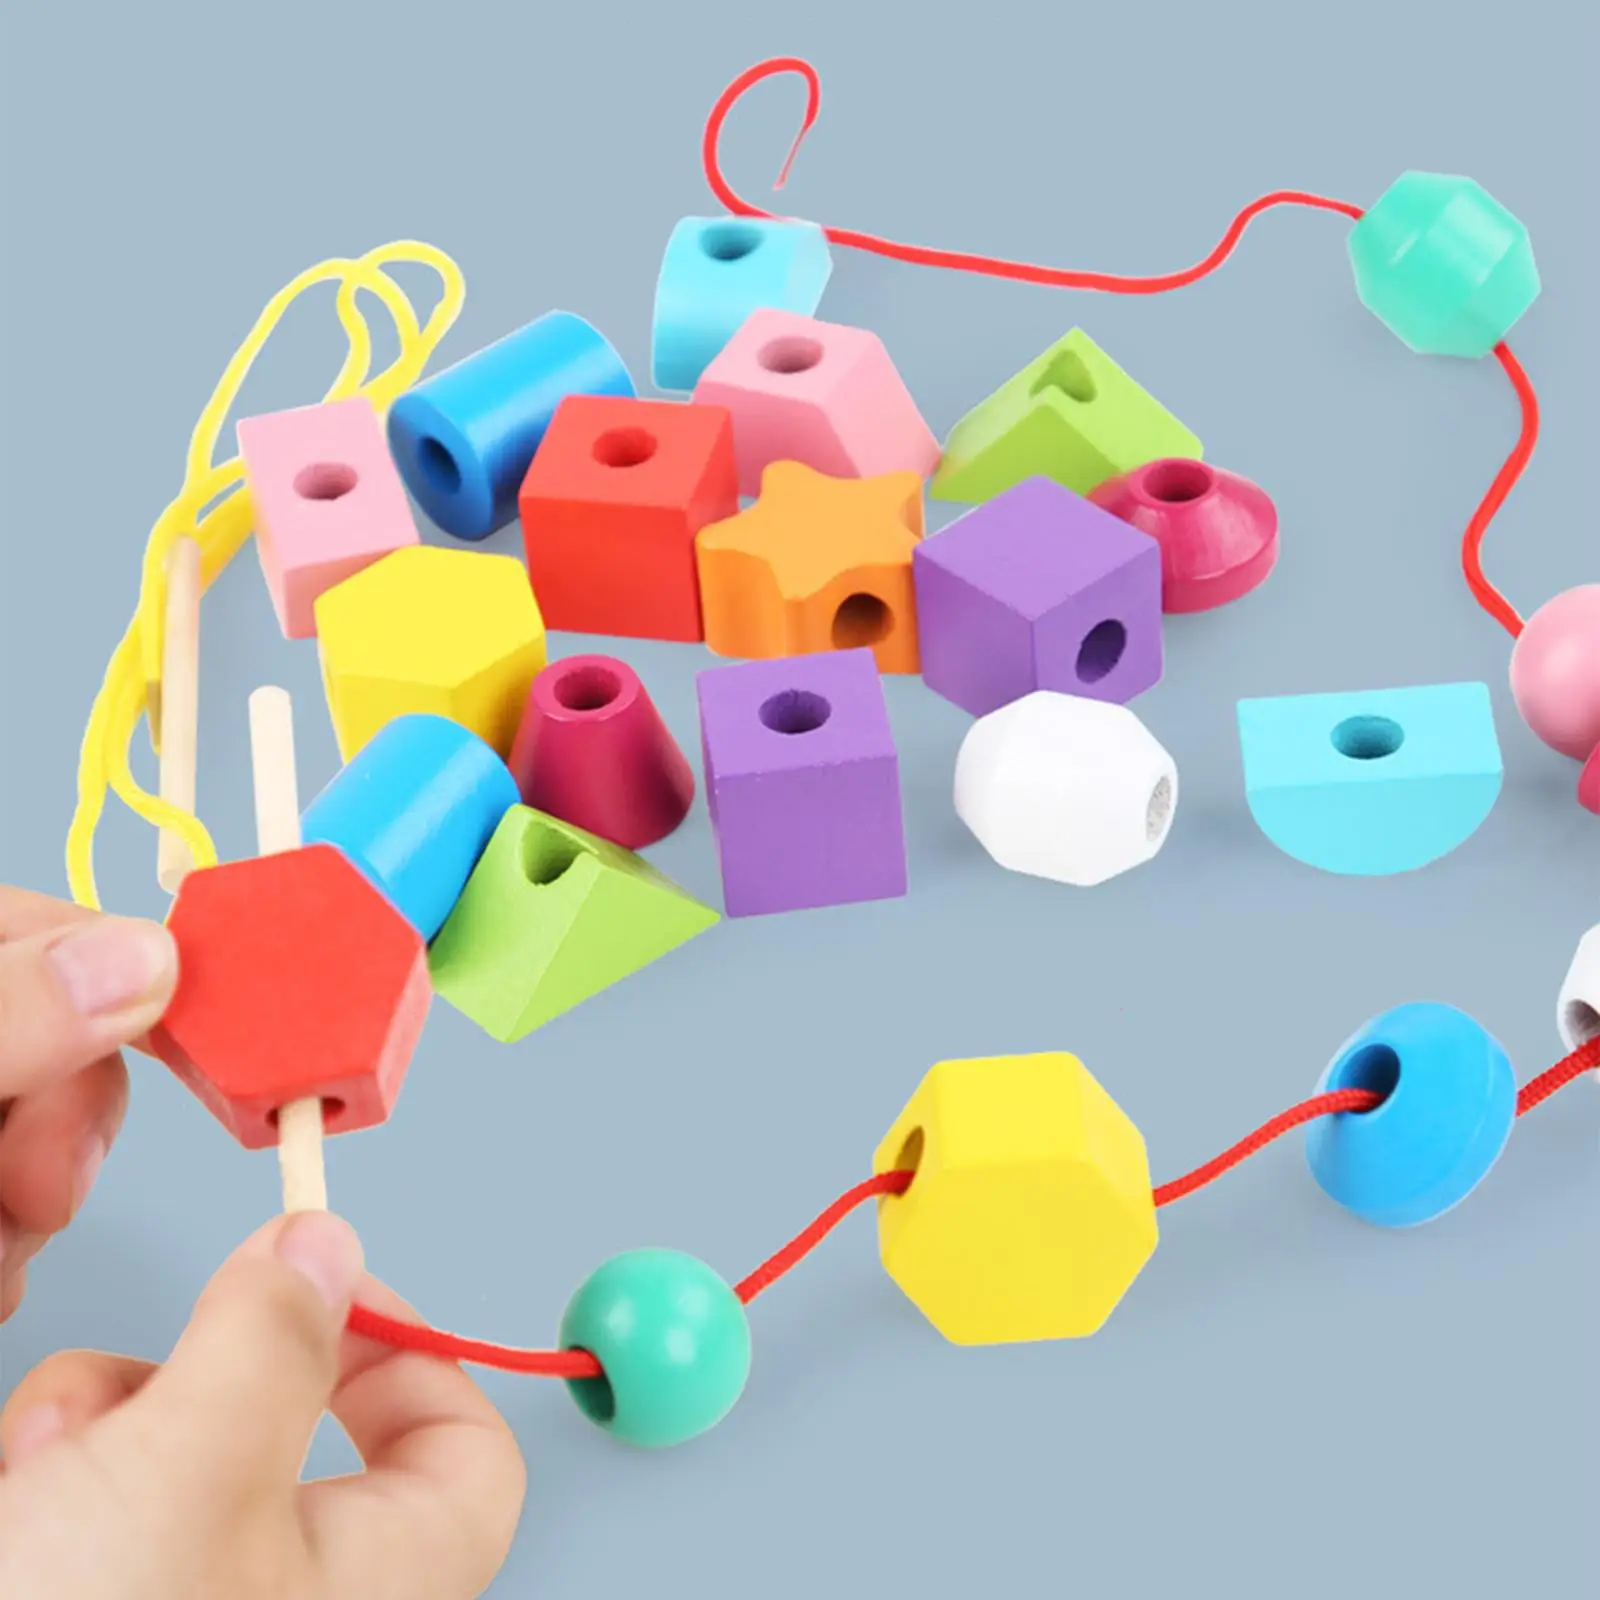 Beaded Toys Monterssori Toy Blocks Learning Early Educational for Preschool